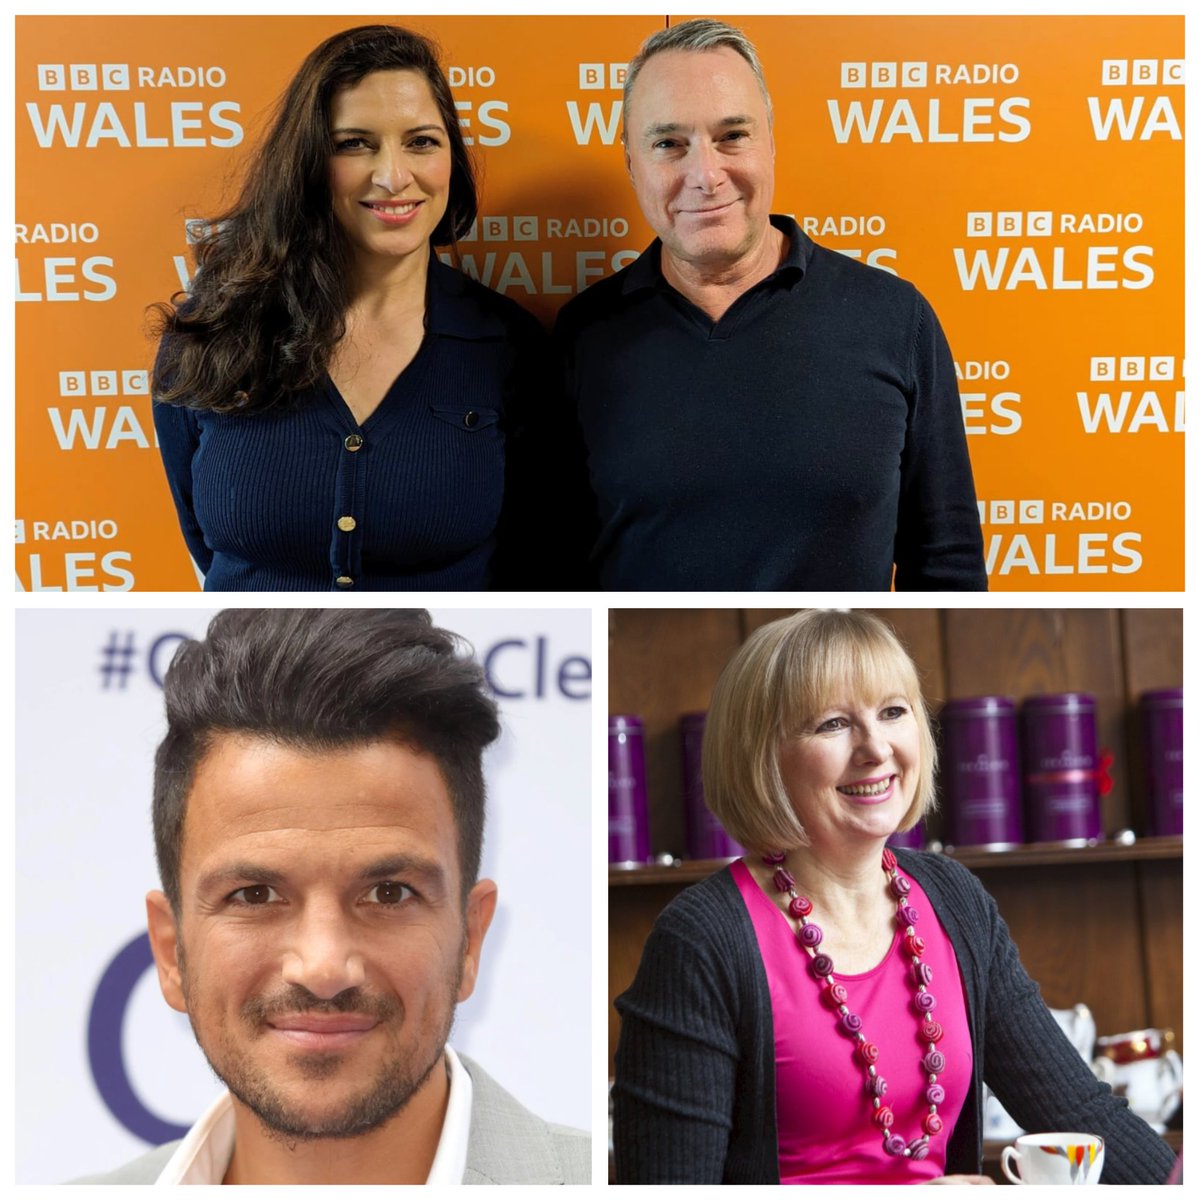 A bit of a foodie theme on the show from 2 @howel_food has some yummy recipes @IanMarber will have an hour of advice on nutrition WhatsApp questions to 03700 100 110 And the lovely @MrPeterAndre will be here after 4 to chat about the foodie festival. bbc.co.uk/programmes/m00…